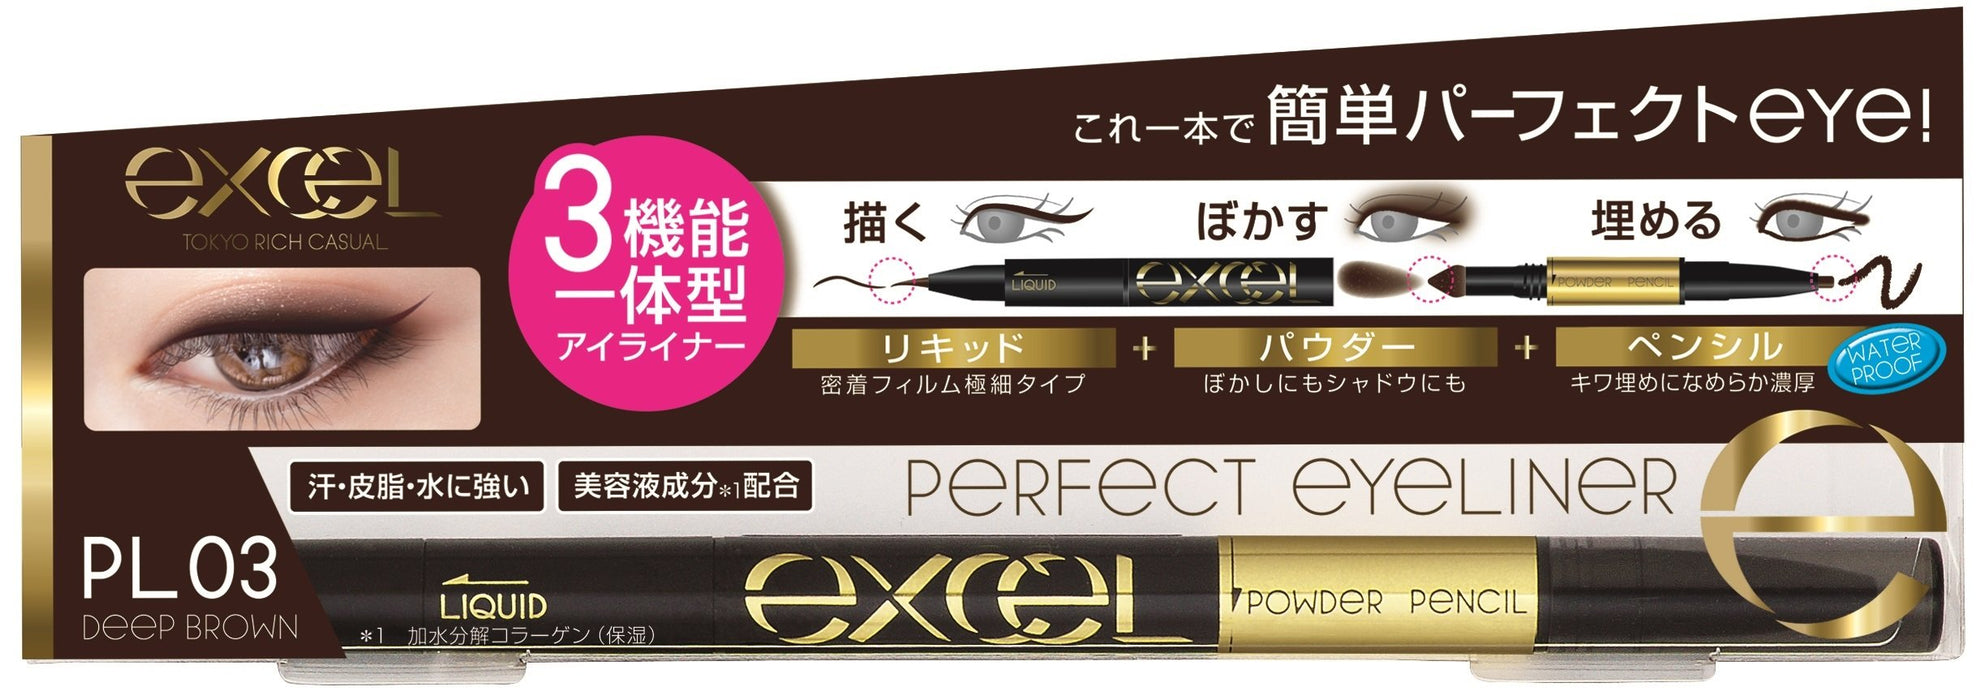 Excel Deep Brown Perfect Eyeliner Npl03 - Long-Lasting Excellence